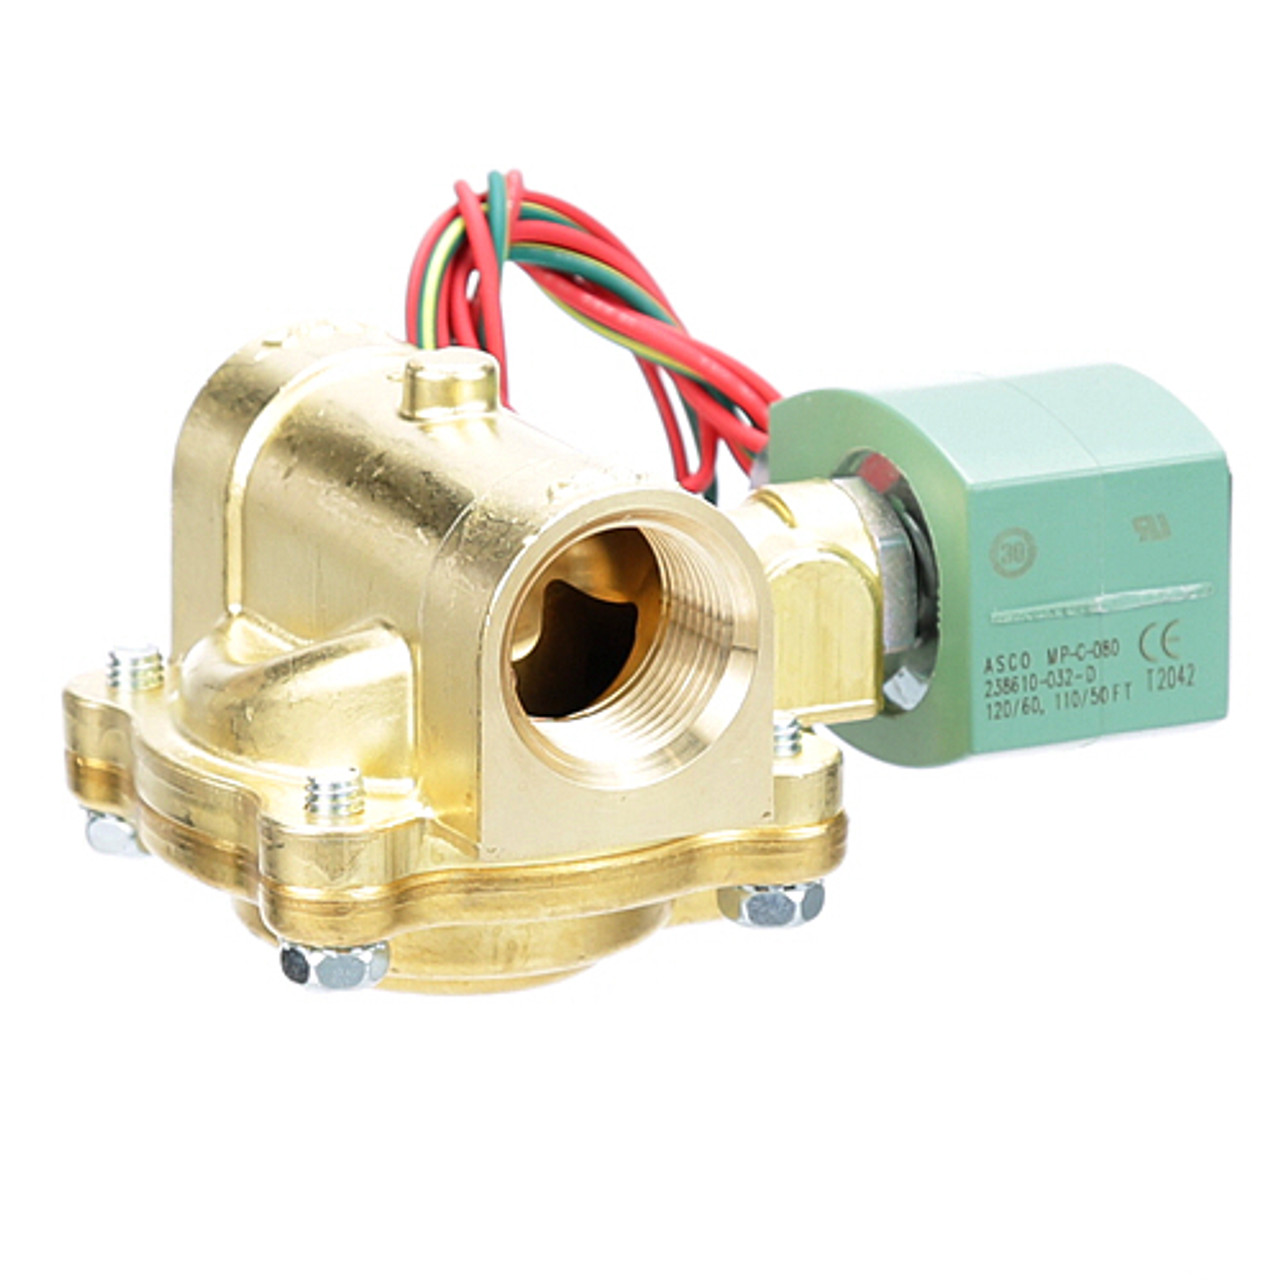 Solenoid Valve, Steam , 120V, 1" - Replacement Part For Cleveland 101699